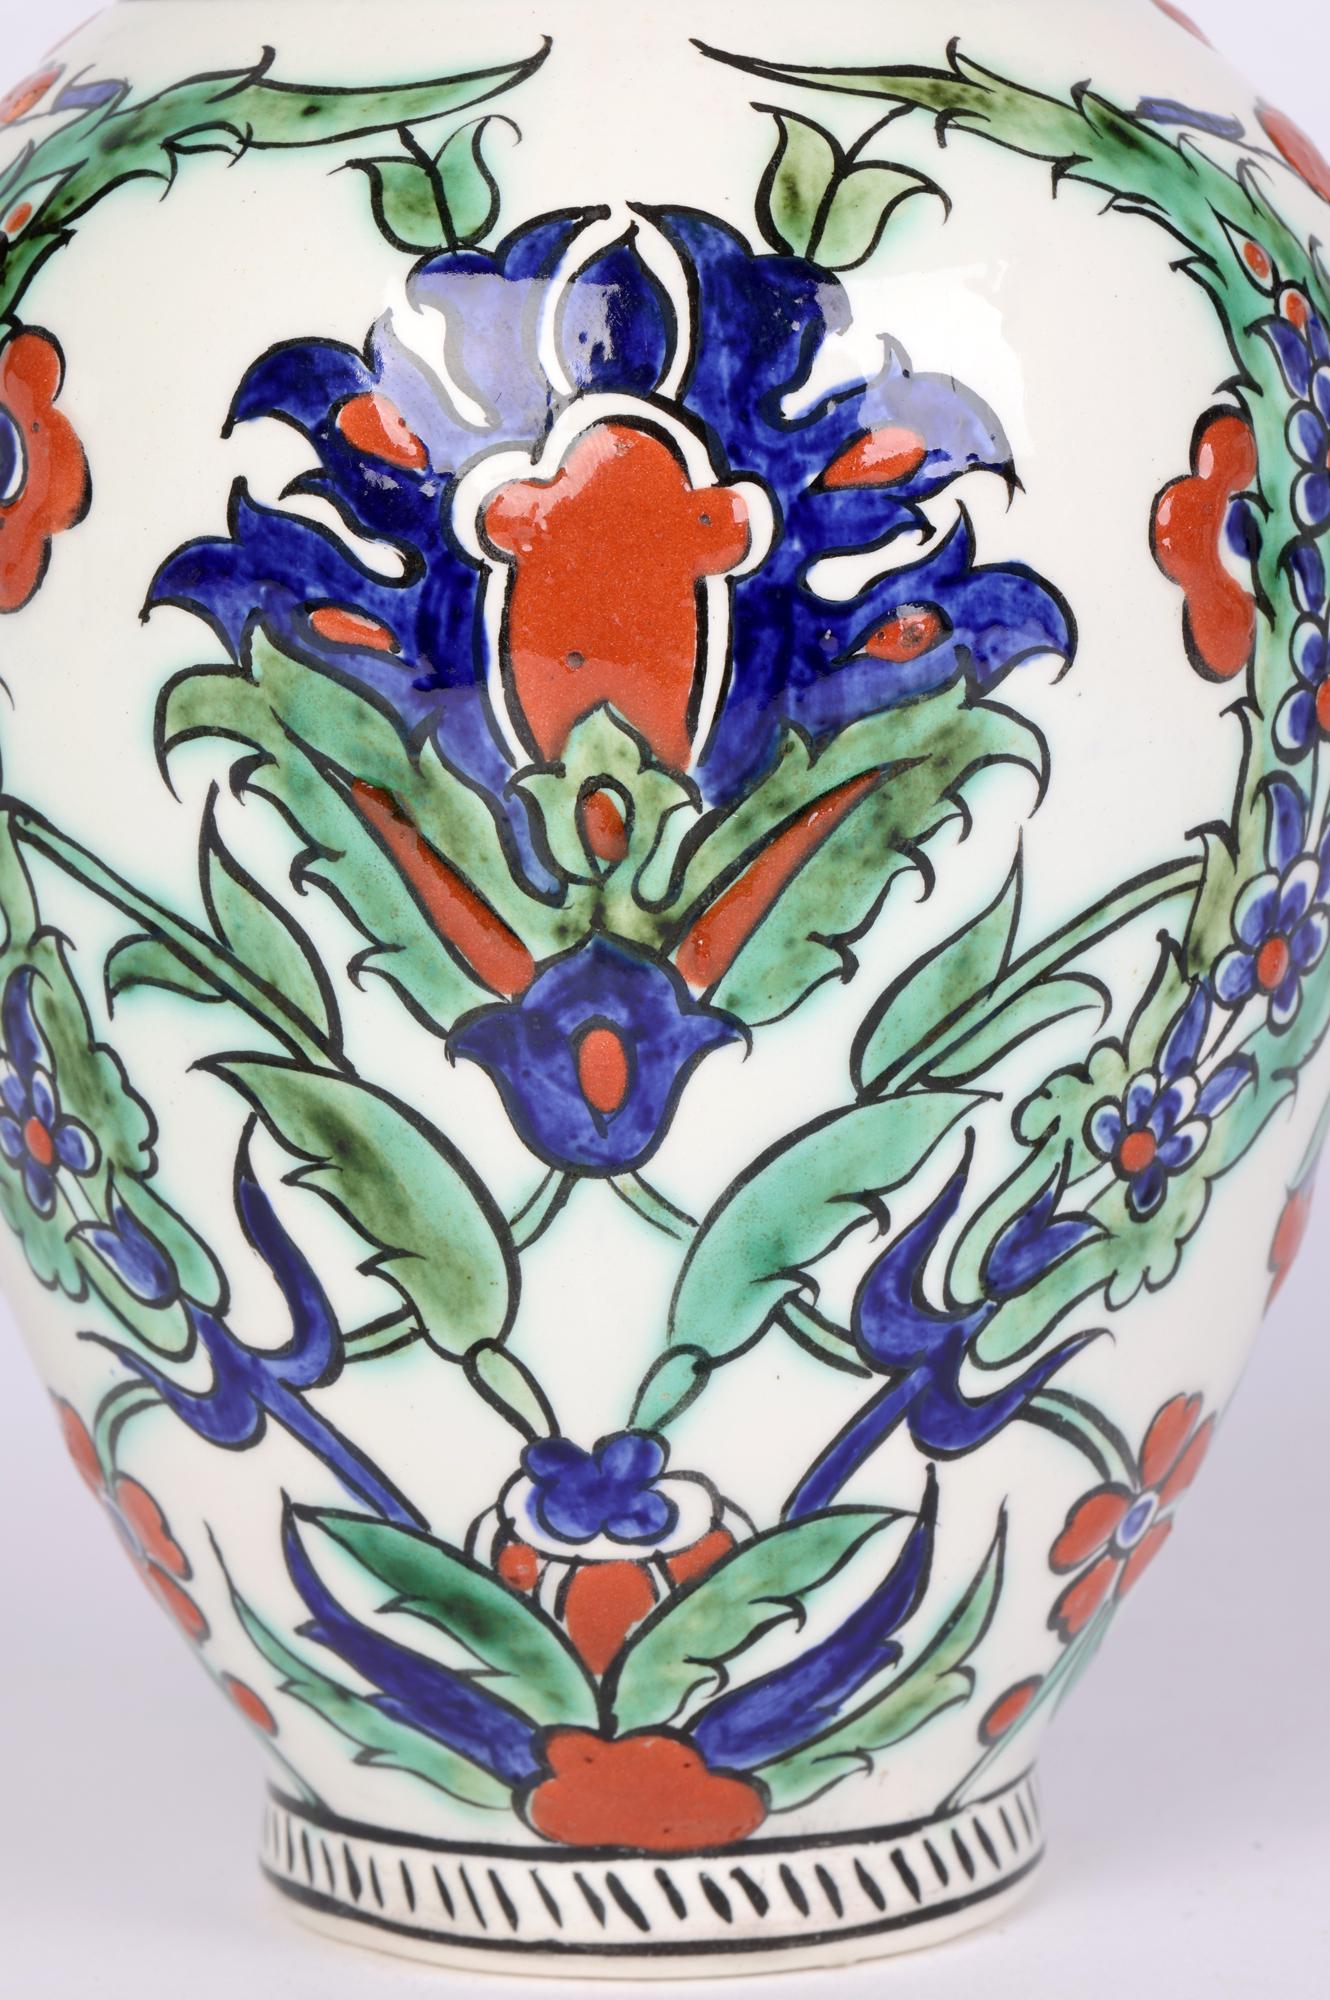 A stunning Belgian hand painted art pottery vase decorated with Islamic style floral designs attributed to Charles Catteau and dating from around 1920. The vase of rounded bulbous shape stands on a narrow round foot with a narrow funnel shaped top